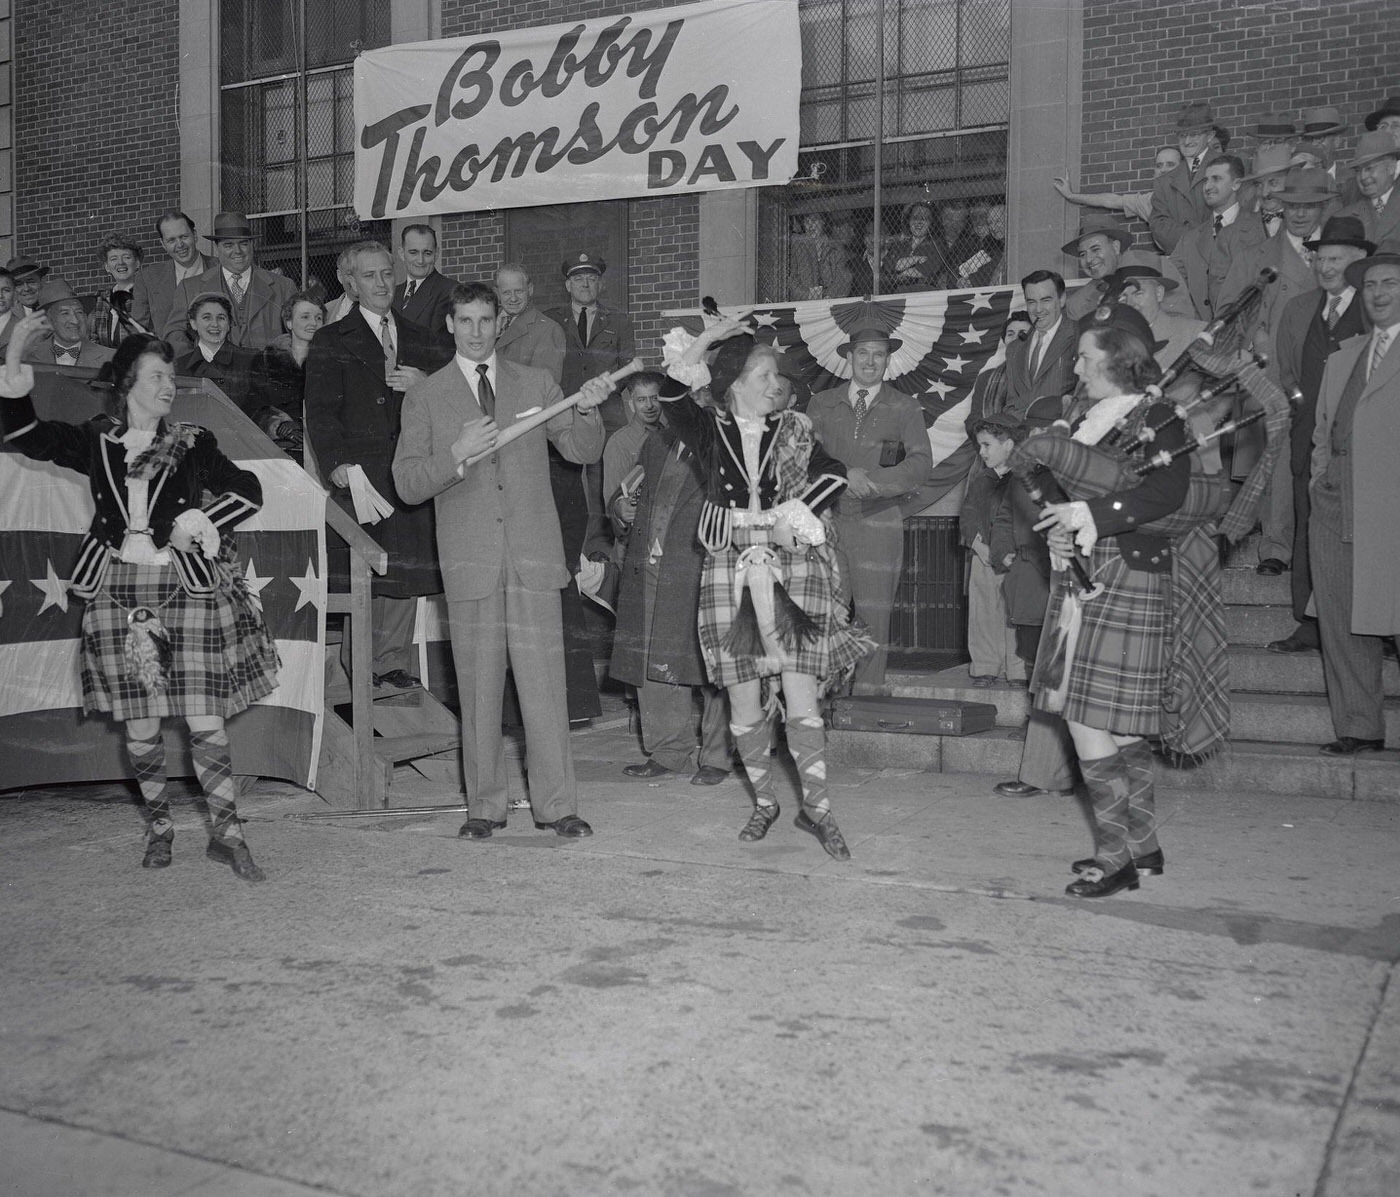 Bobby Thomson Celebrated With Dancing Scots During Bobby Thomson Day At Staten Island'S City Hall.